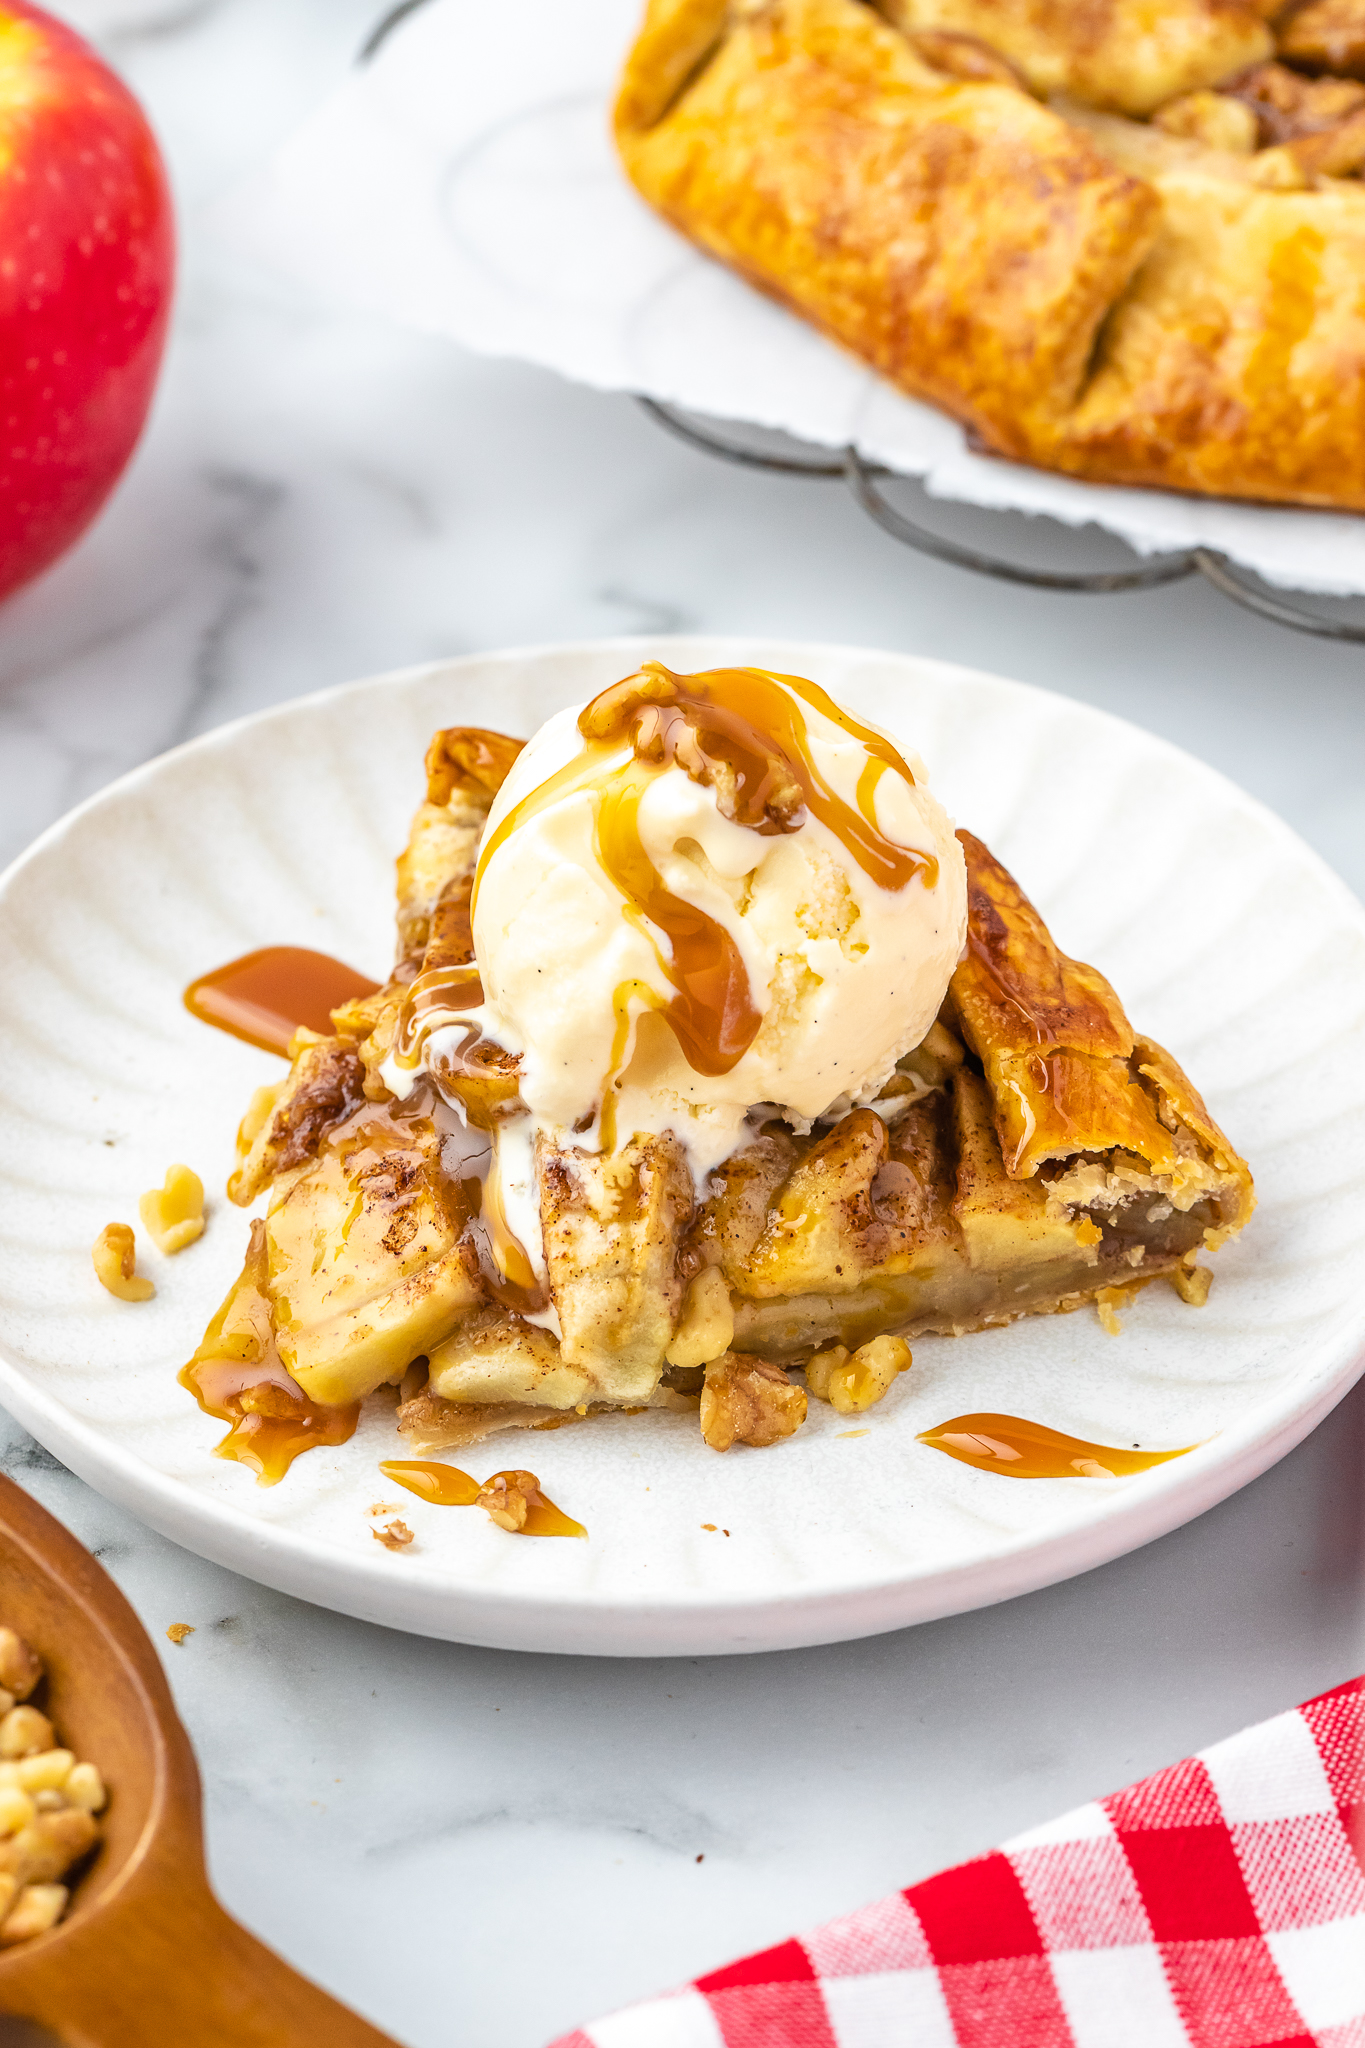 slice of apple crostata on a plate topped with ice cream and caramel sauce